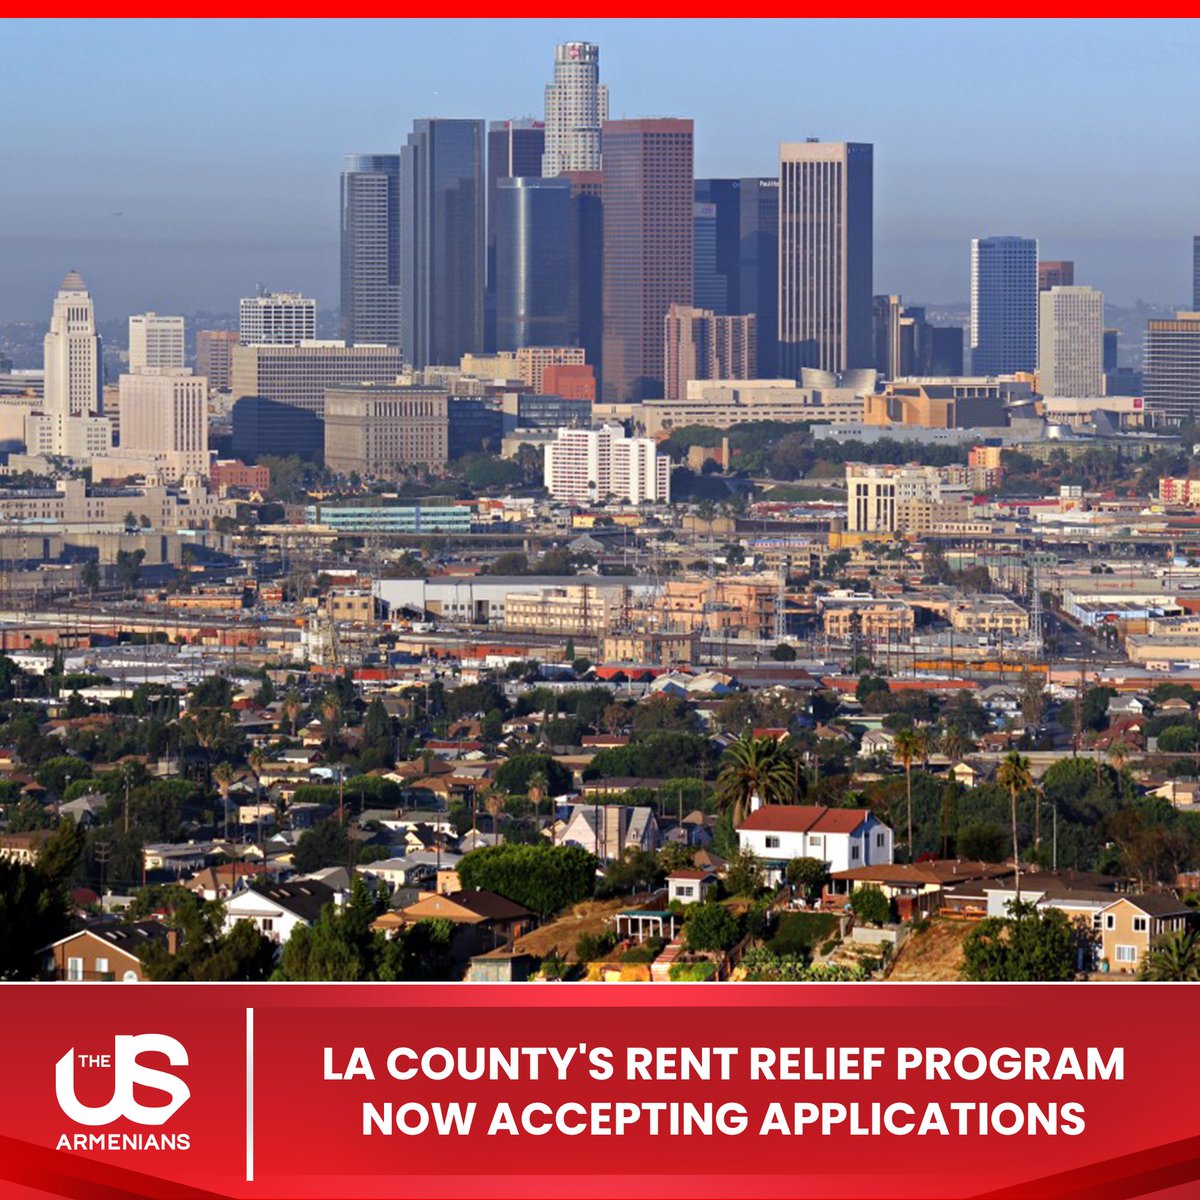 Los Angeles County will begin accepting applications on Monday for the second round of its rent relief program to aid landlords impacted by the COVID-19 pandemic.

#LACounty #RentReliefProgram

Source: Fox11